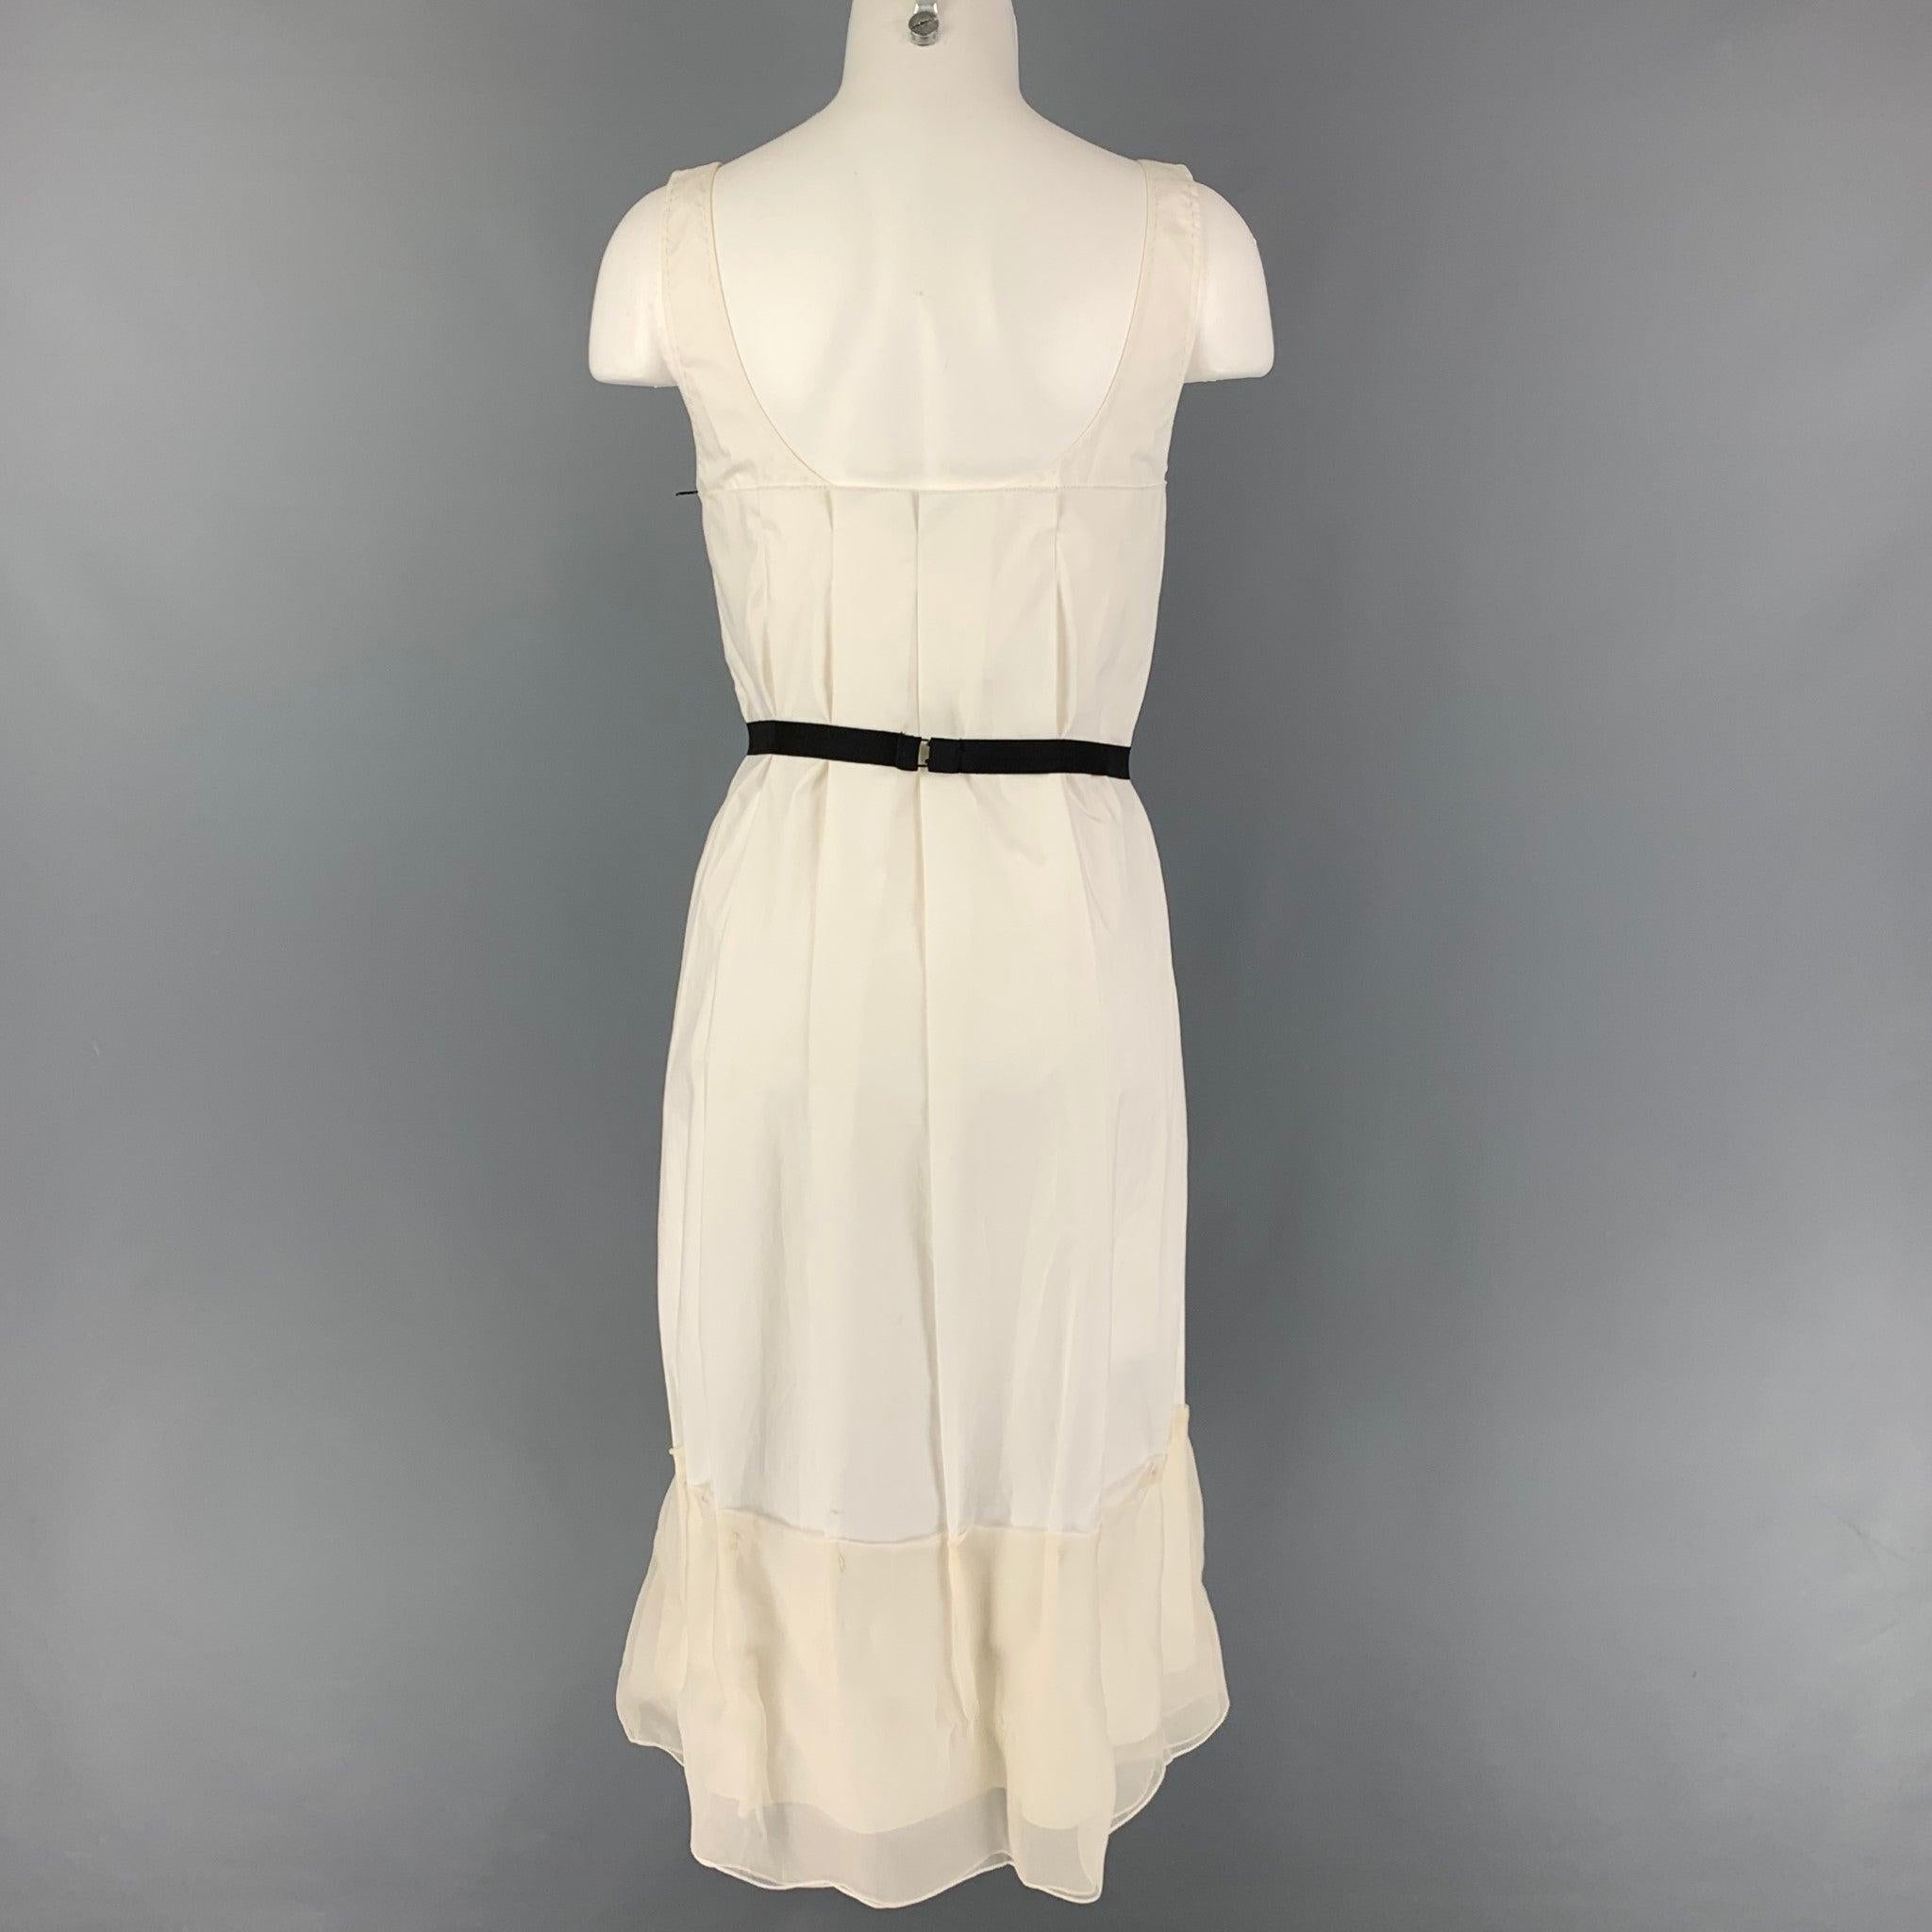 VERA WANG Size 2 White Cotton Silk Mixed Fabrics Pleated Dress In Good Condition For Sale In San Francisco, CA